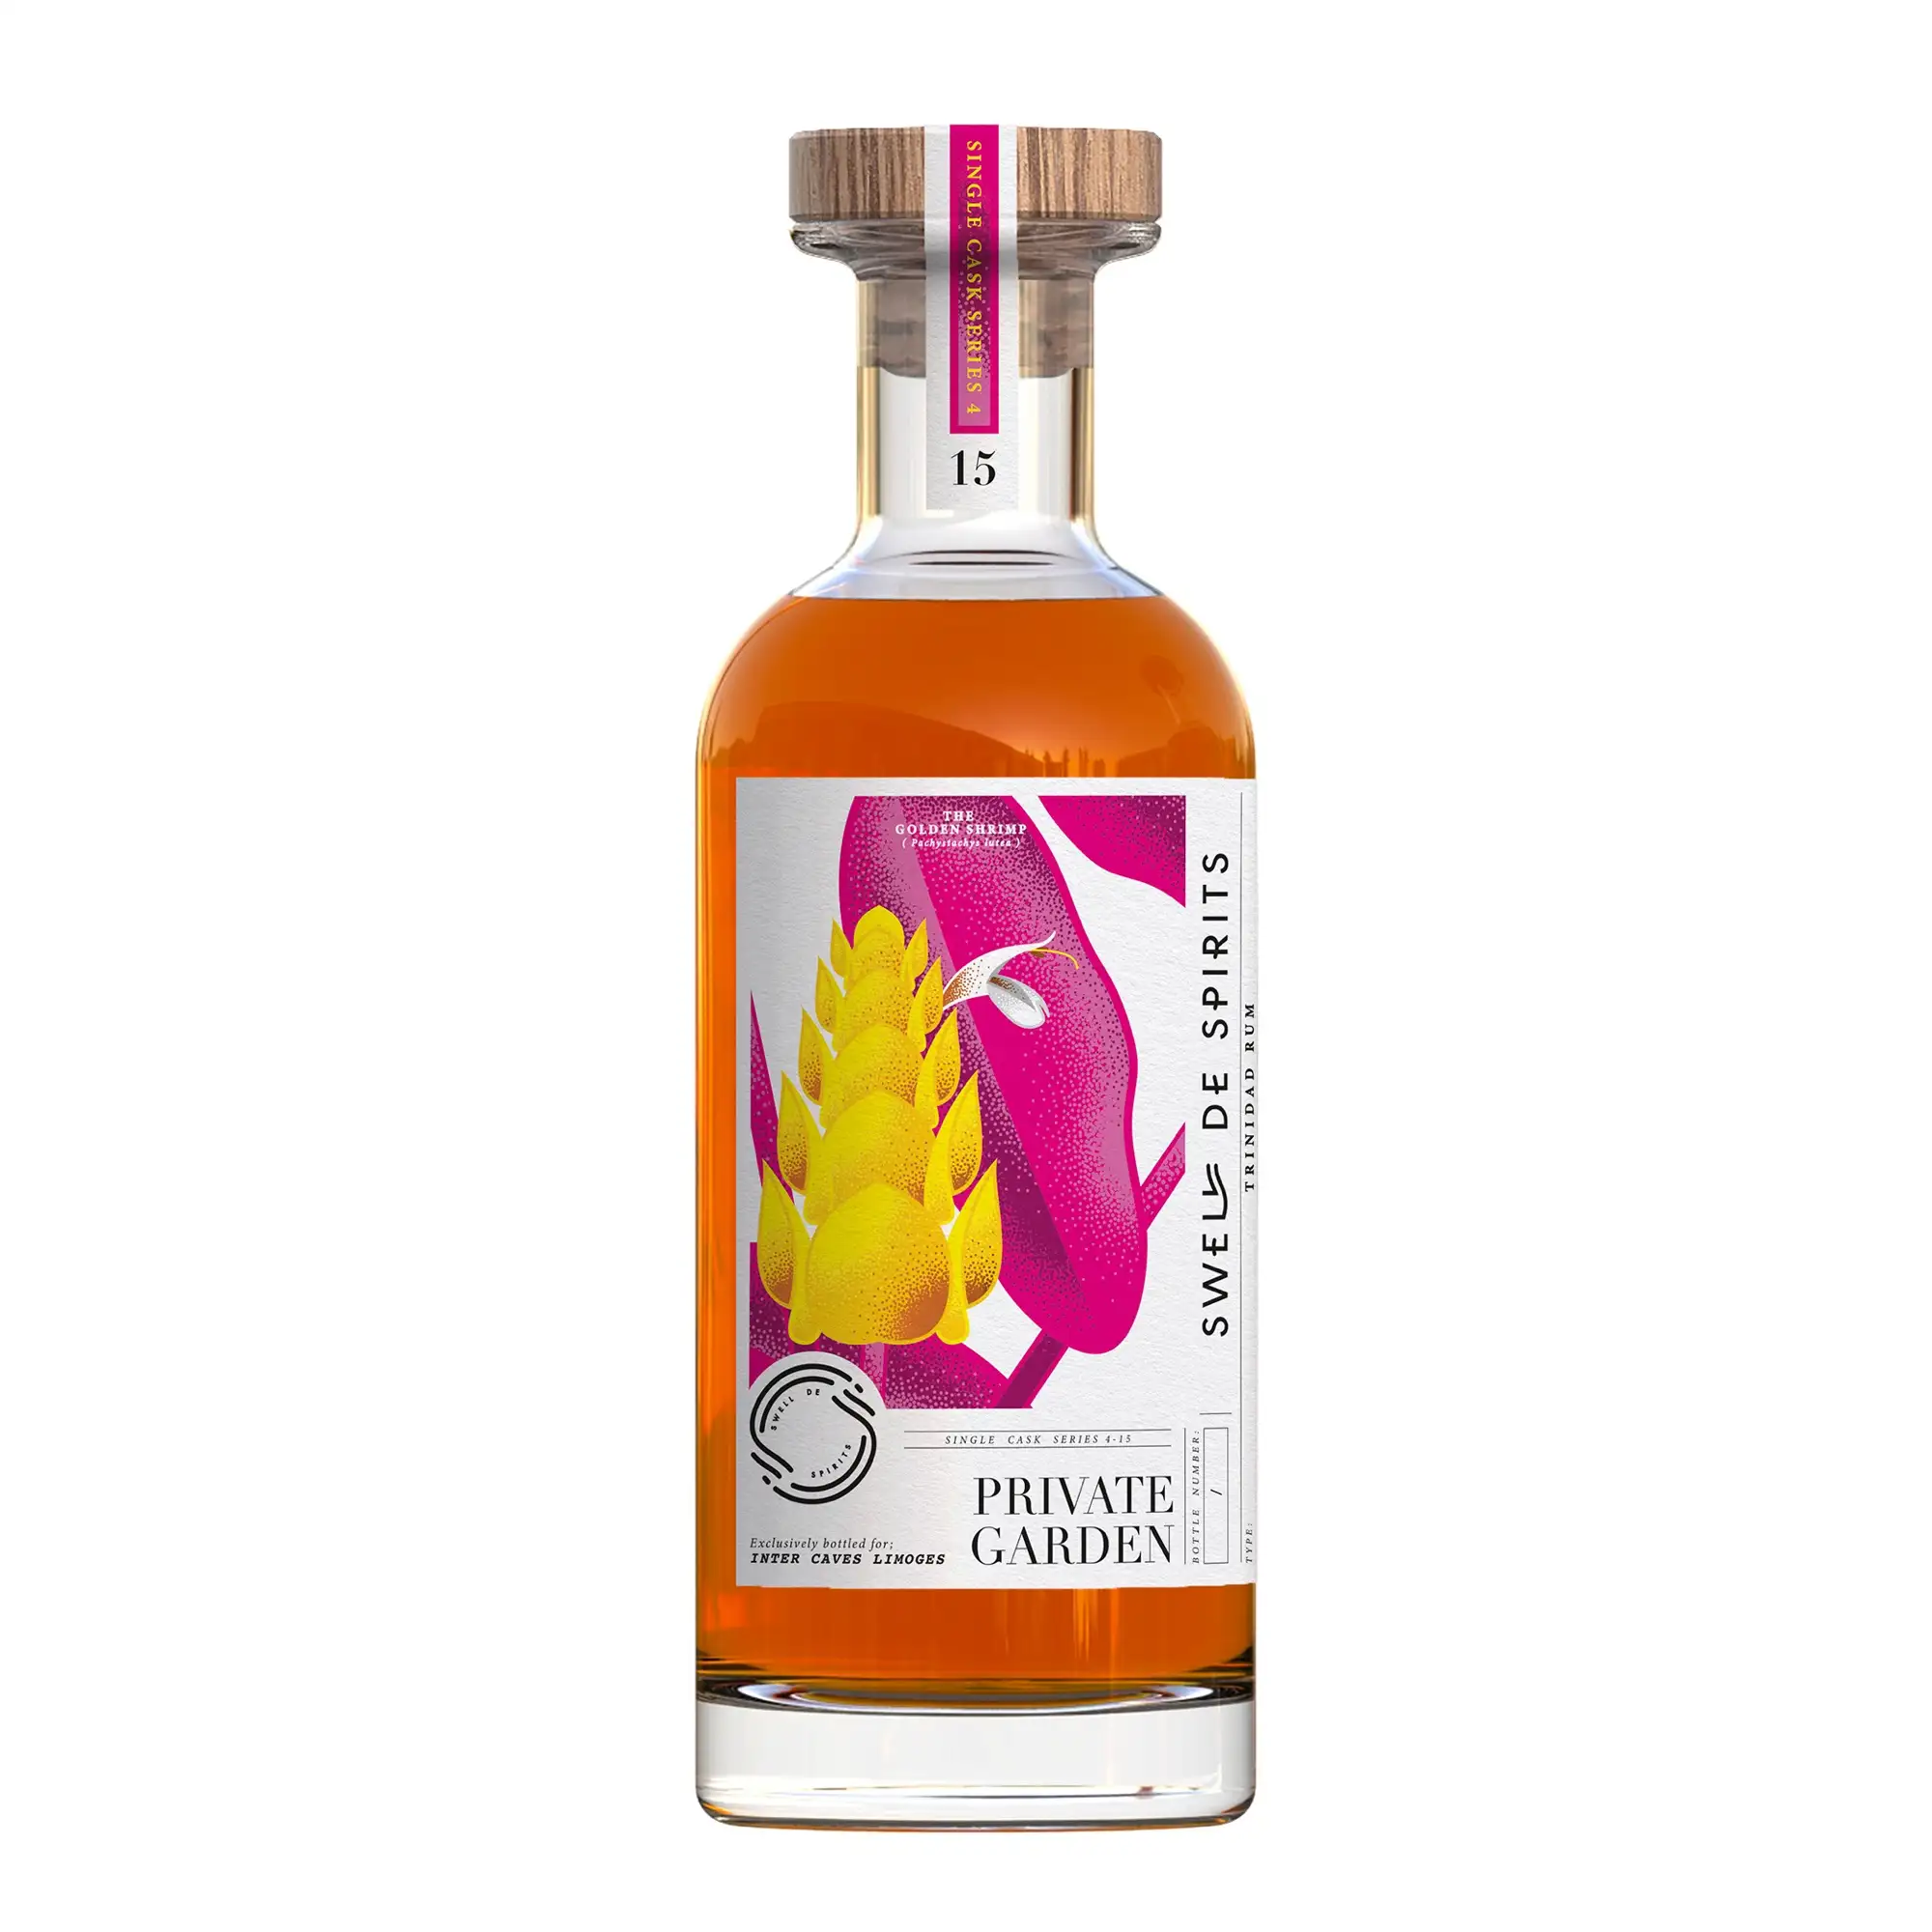 Image of the front of the bottle of the rum Private Garden N°15 (InterCaves Limoges) HTR